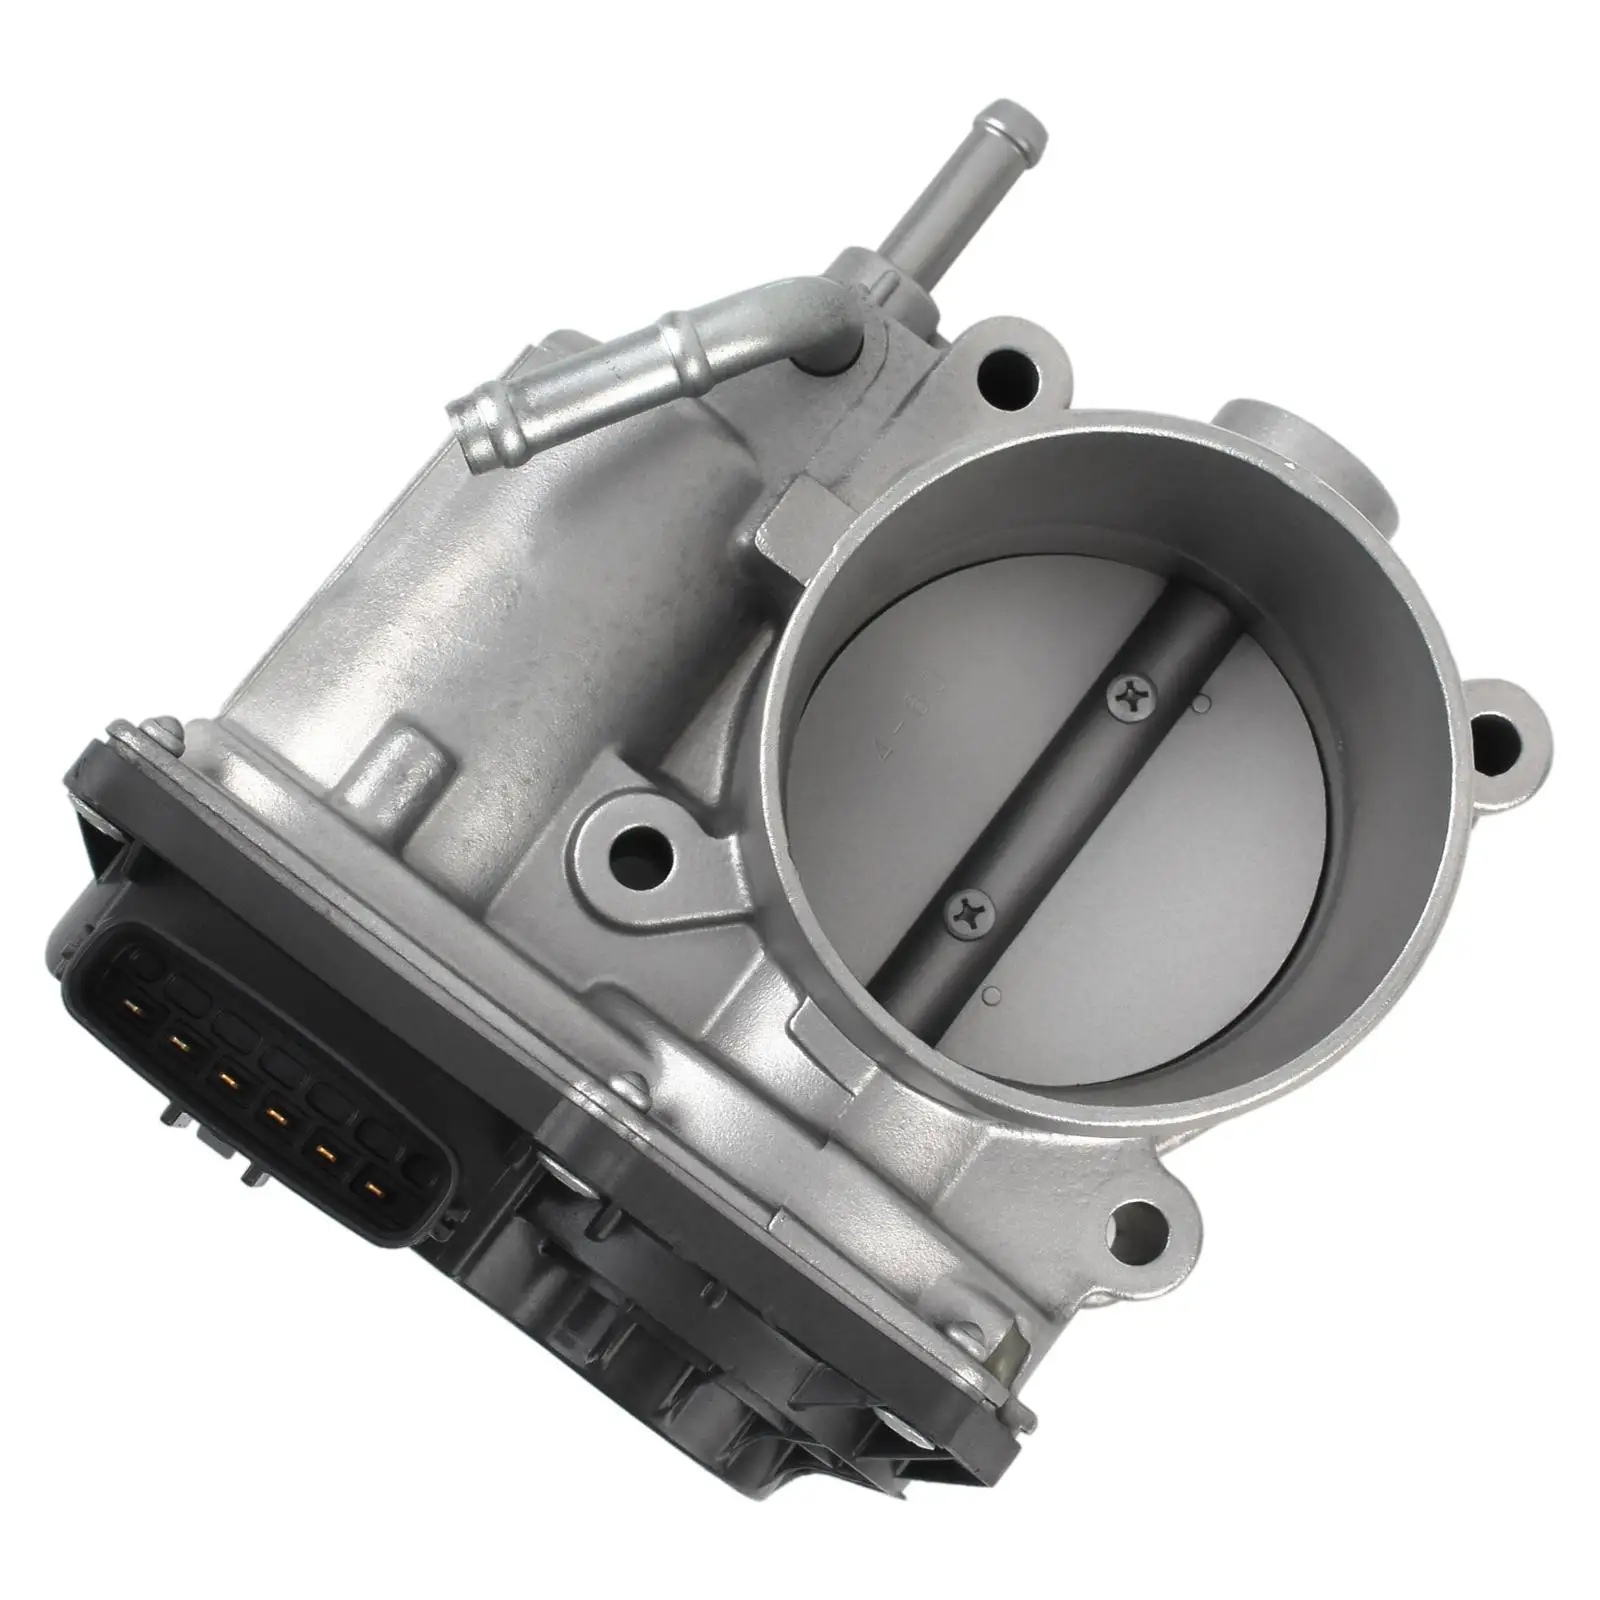 Throttle Body Valve 16112AA010 Air Intake System Replacement Auto Parts Car Supplies Accessories for Outback Impreza